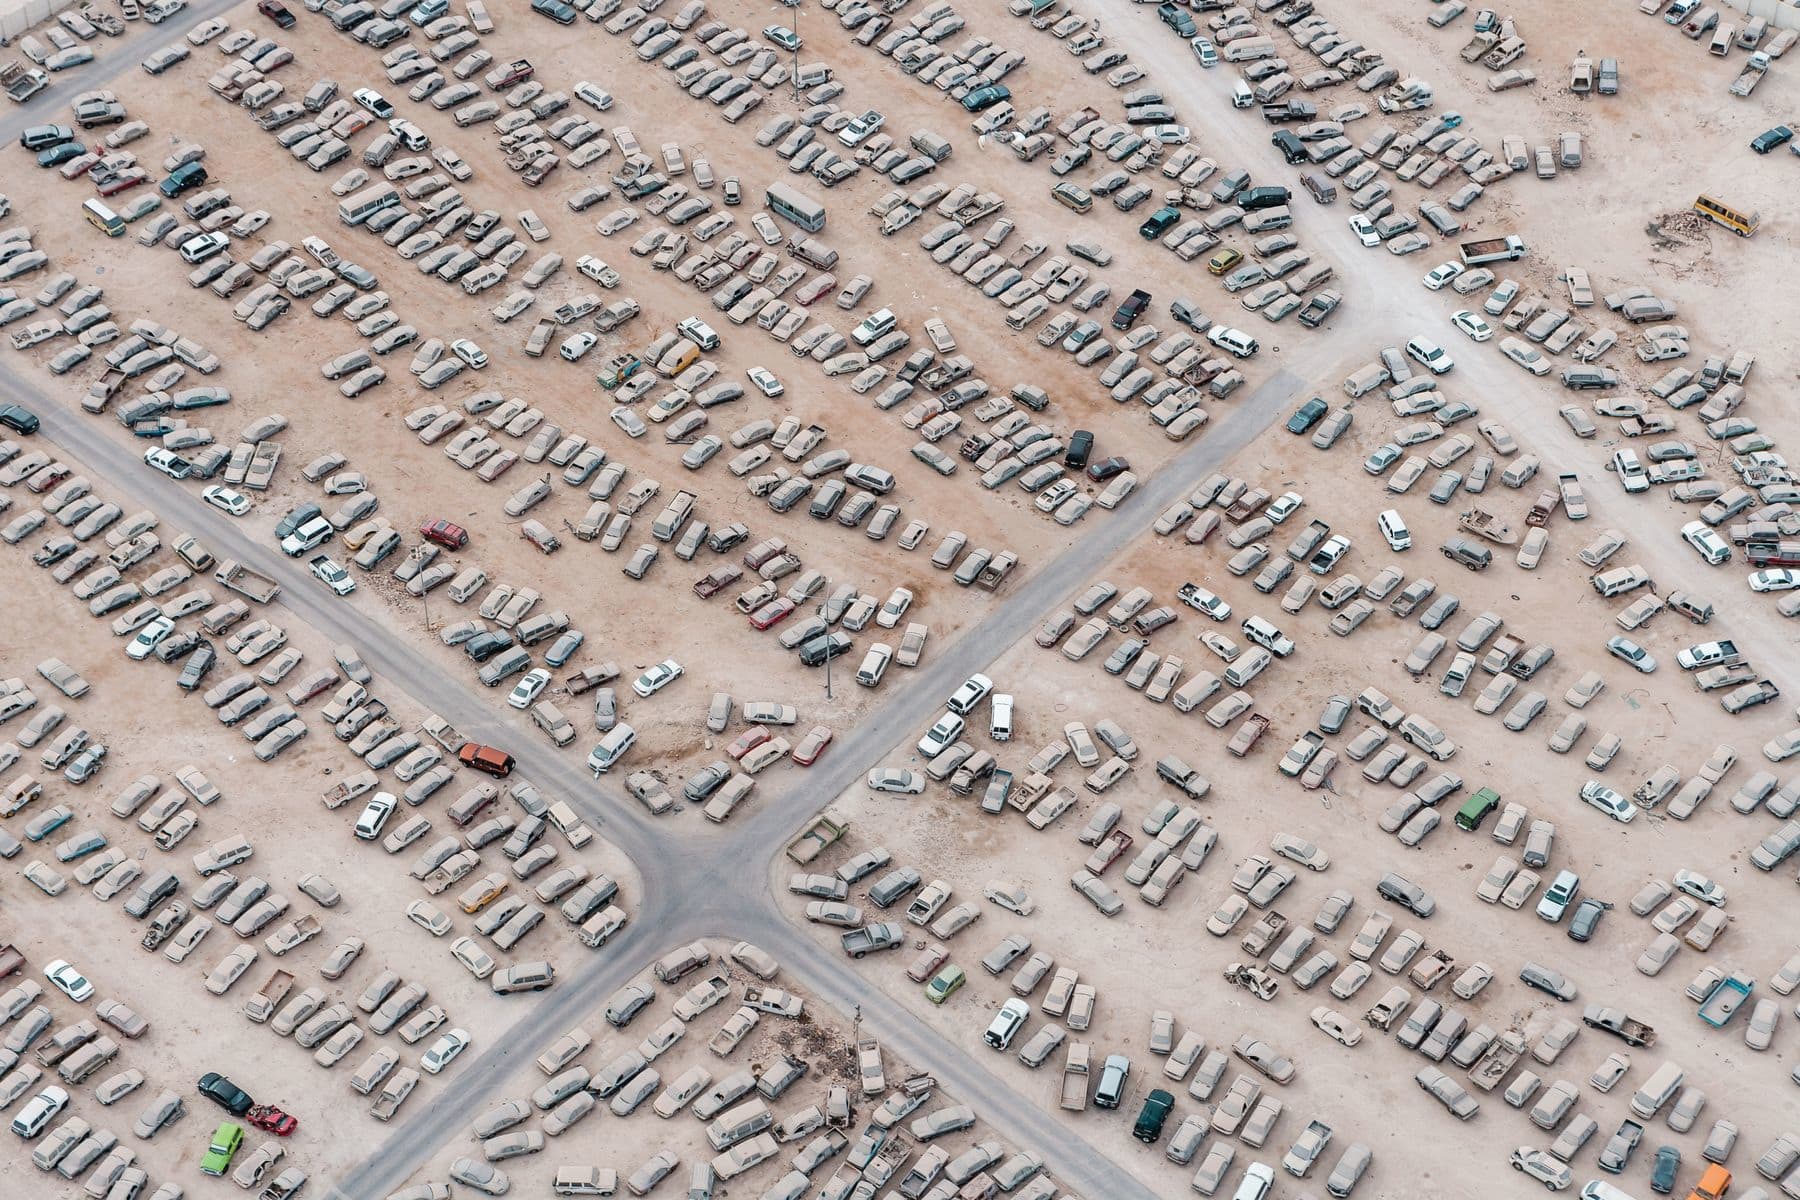 A parking lot filled with dirty cars